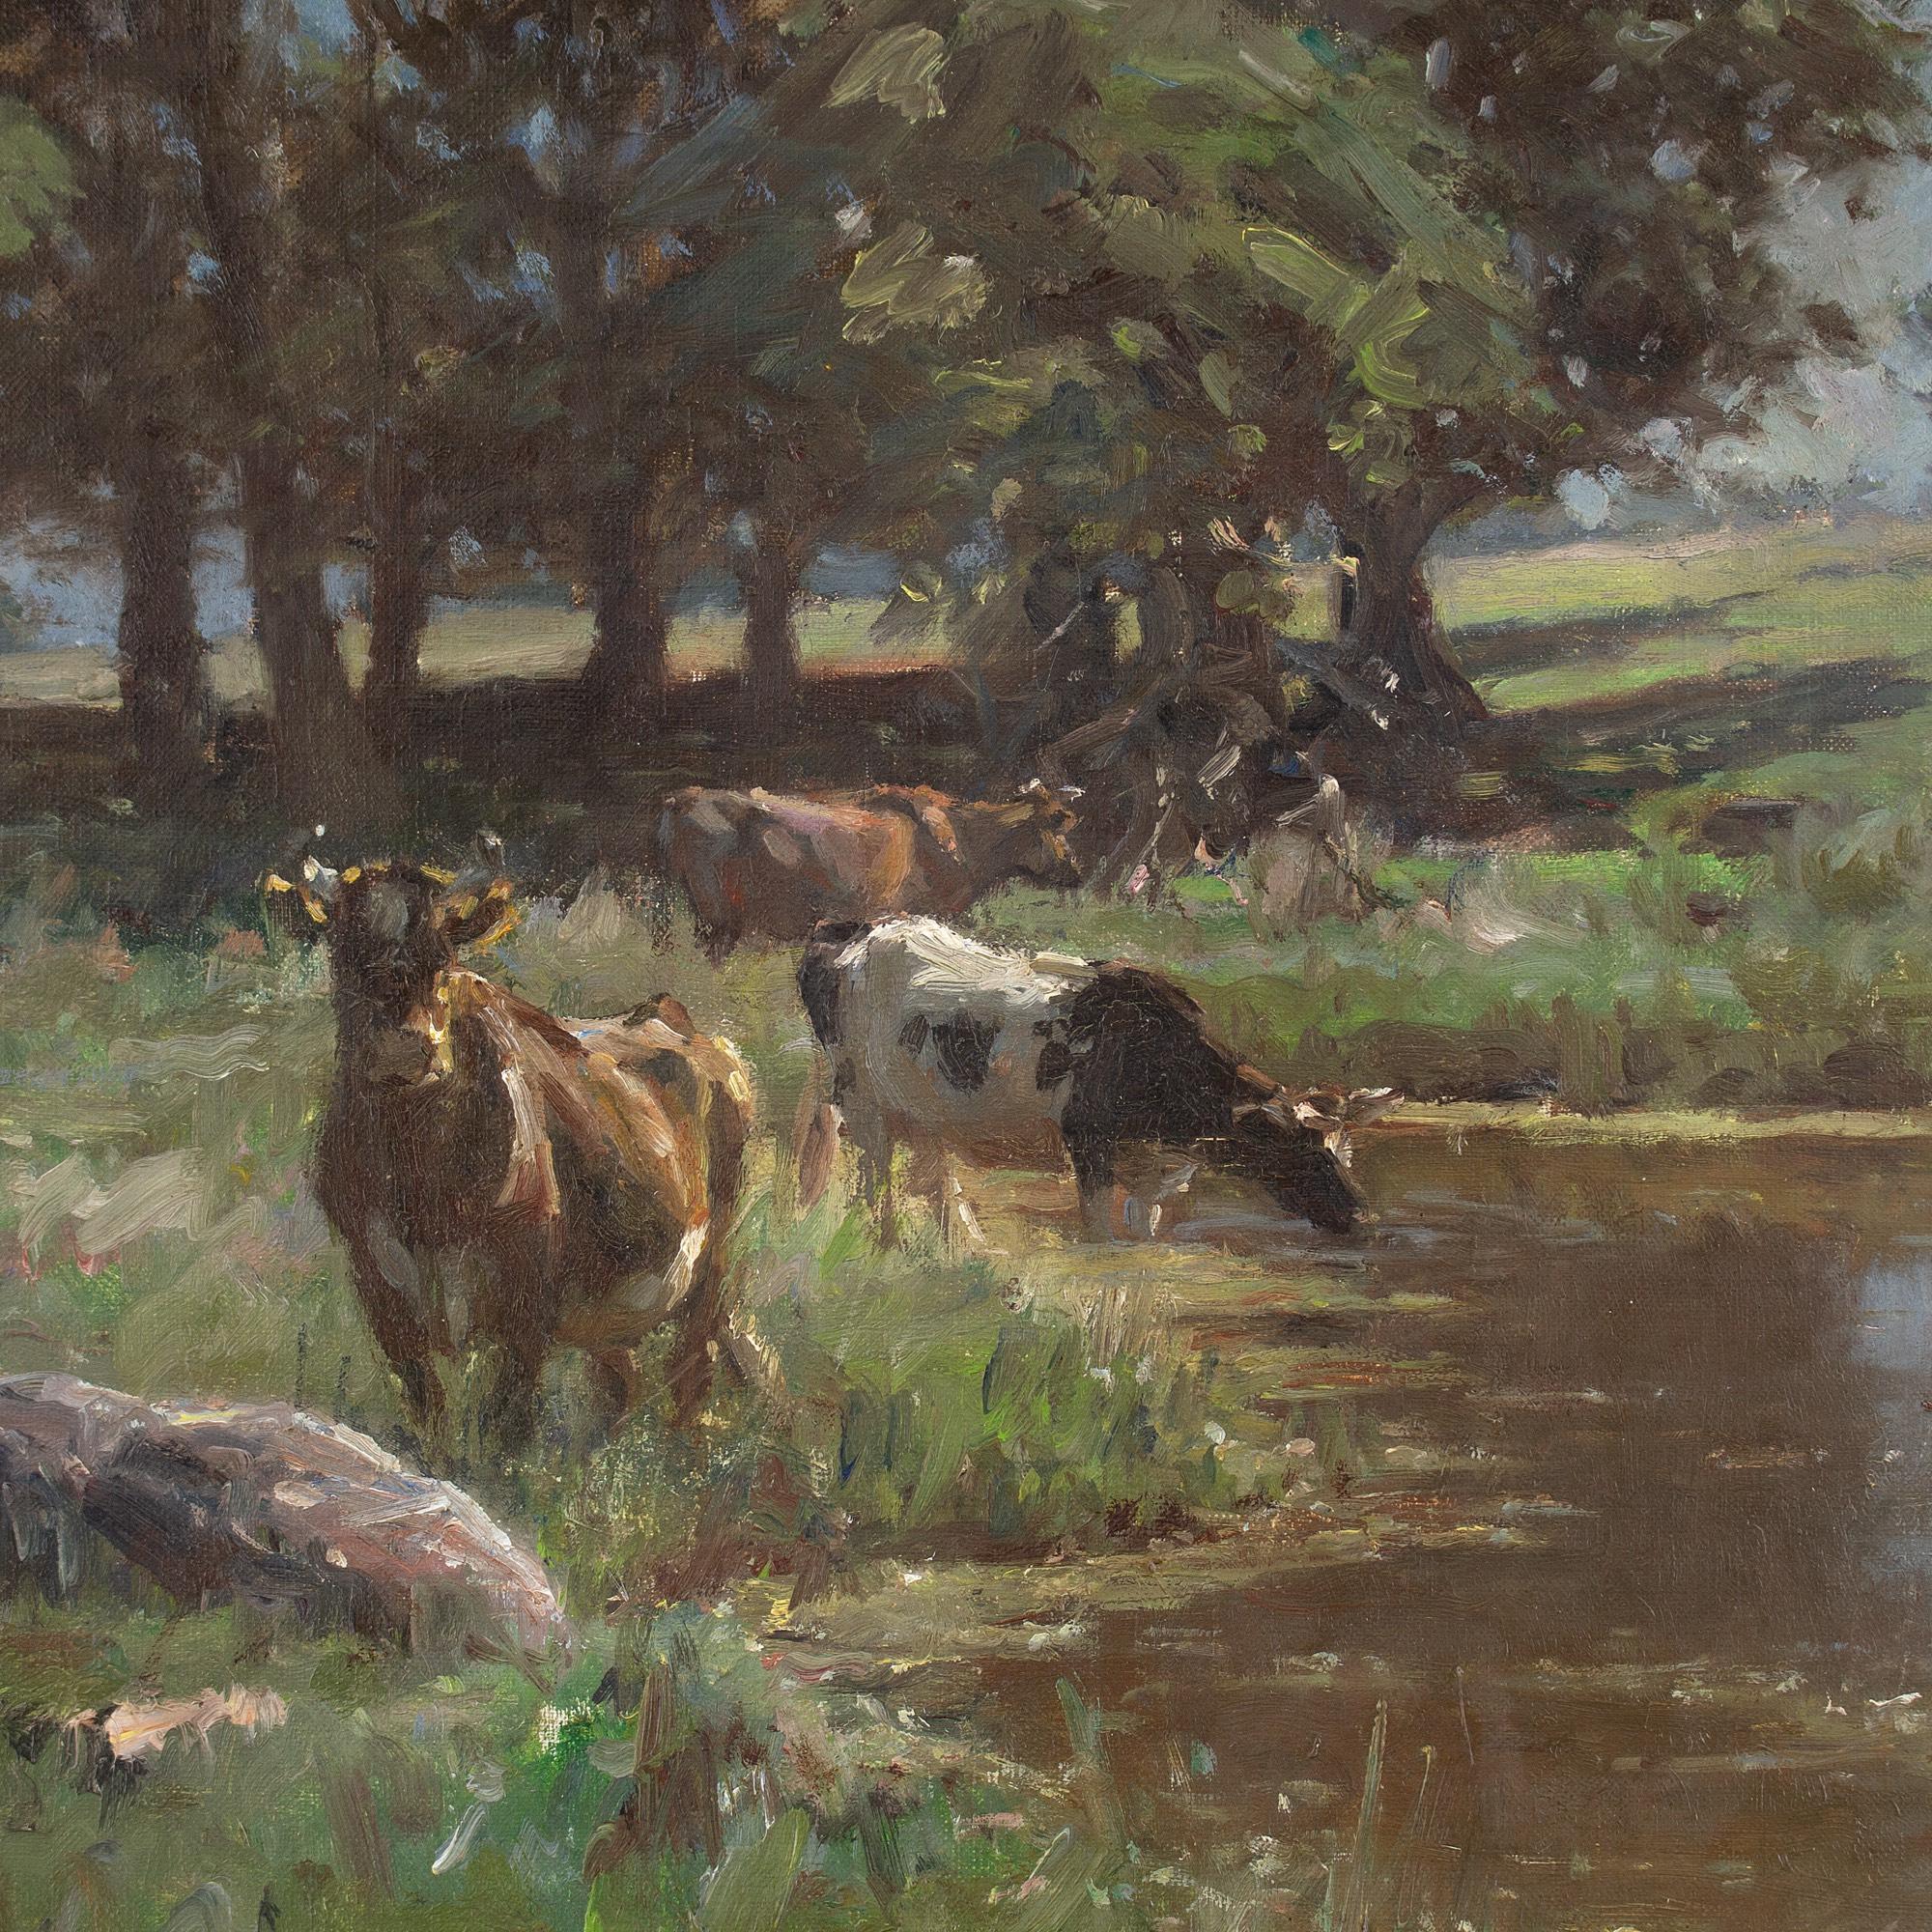 Michael Therkildsen, Pastoral Landscape With Cattle & Pond, Antique Oil Painting 6